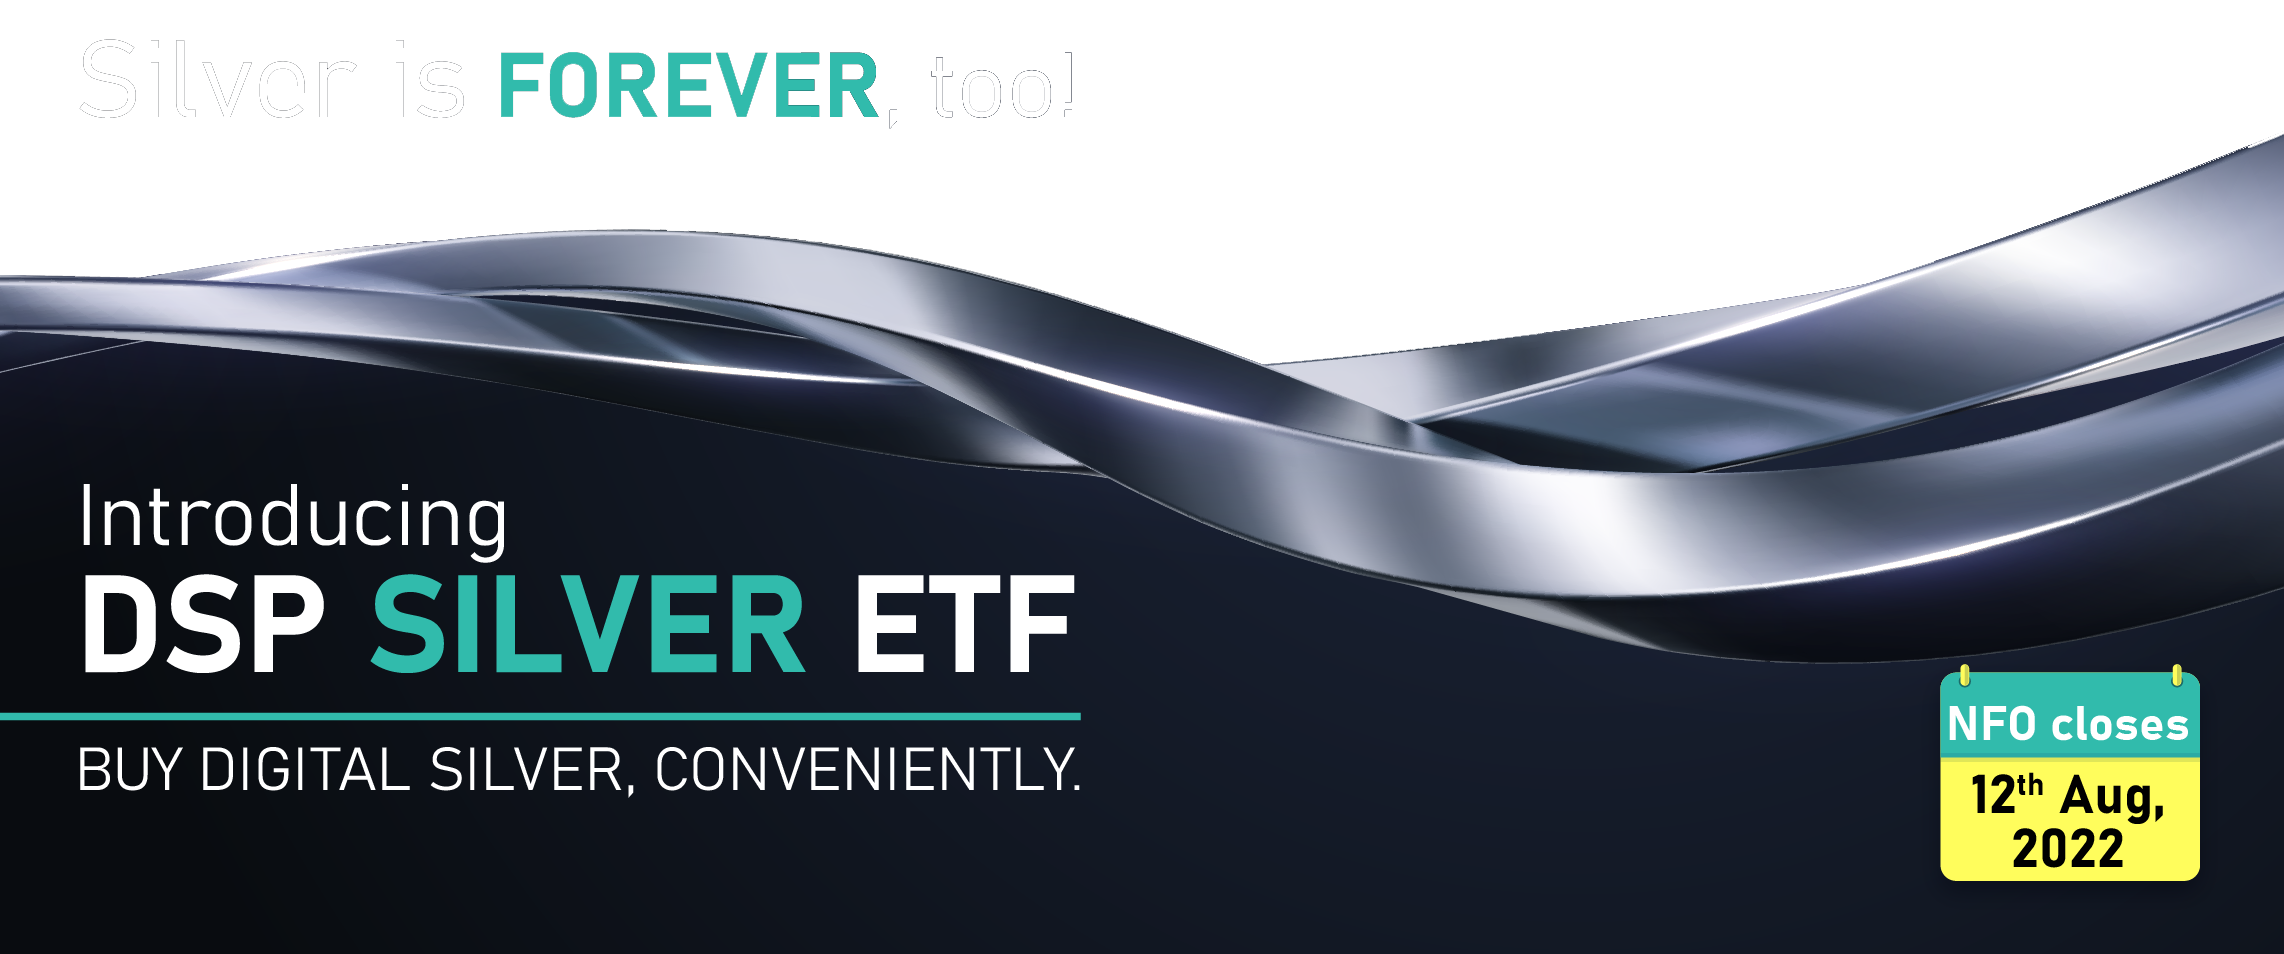 Silver is Forever, too! Introducing DSP Silver ETF | BUY DIGITAL SILVER, CONVENIENTLY. | NFO closes 12th Aug, 2022